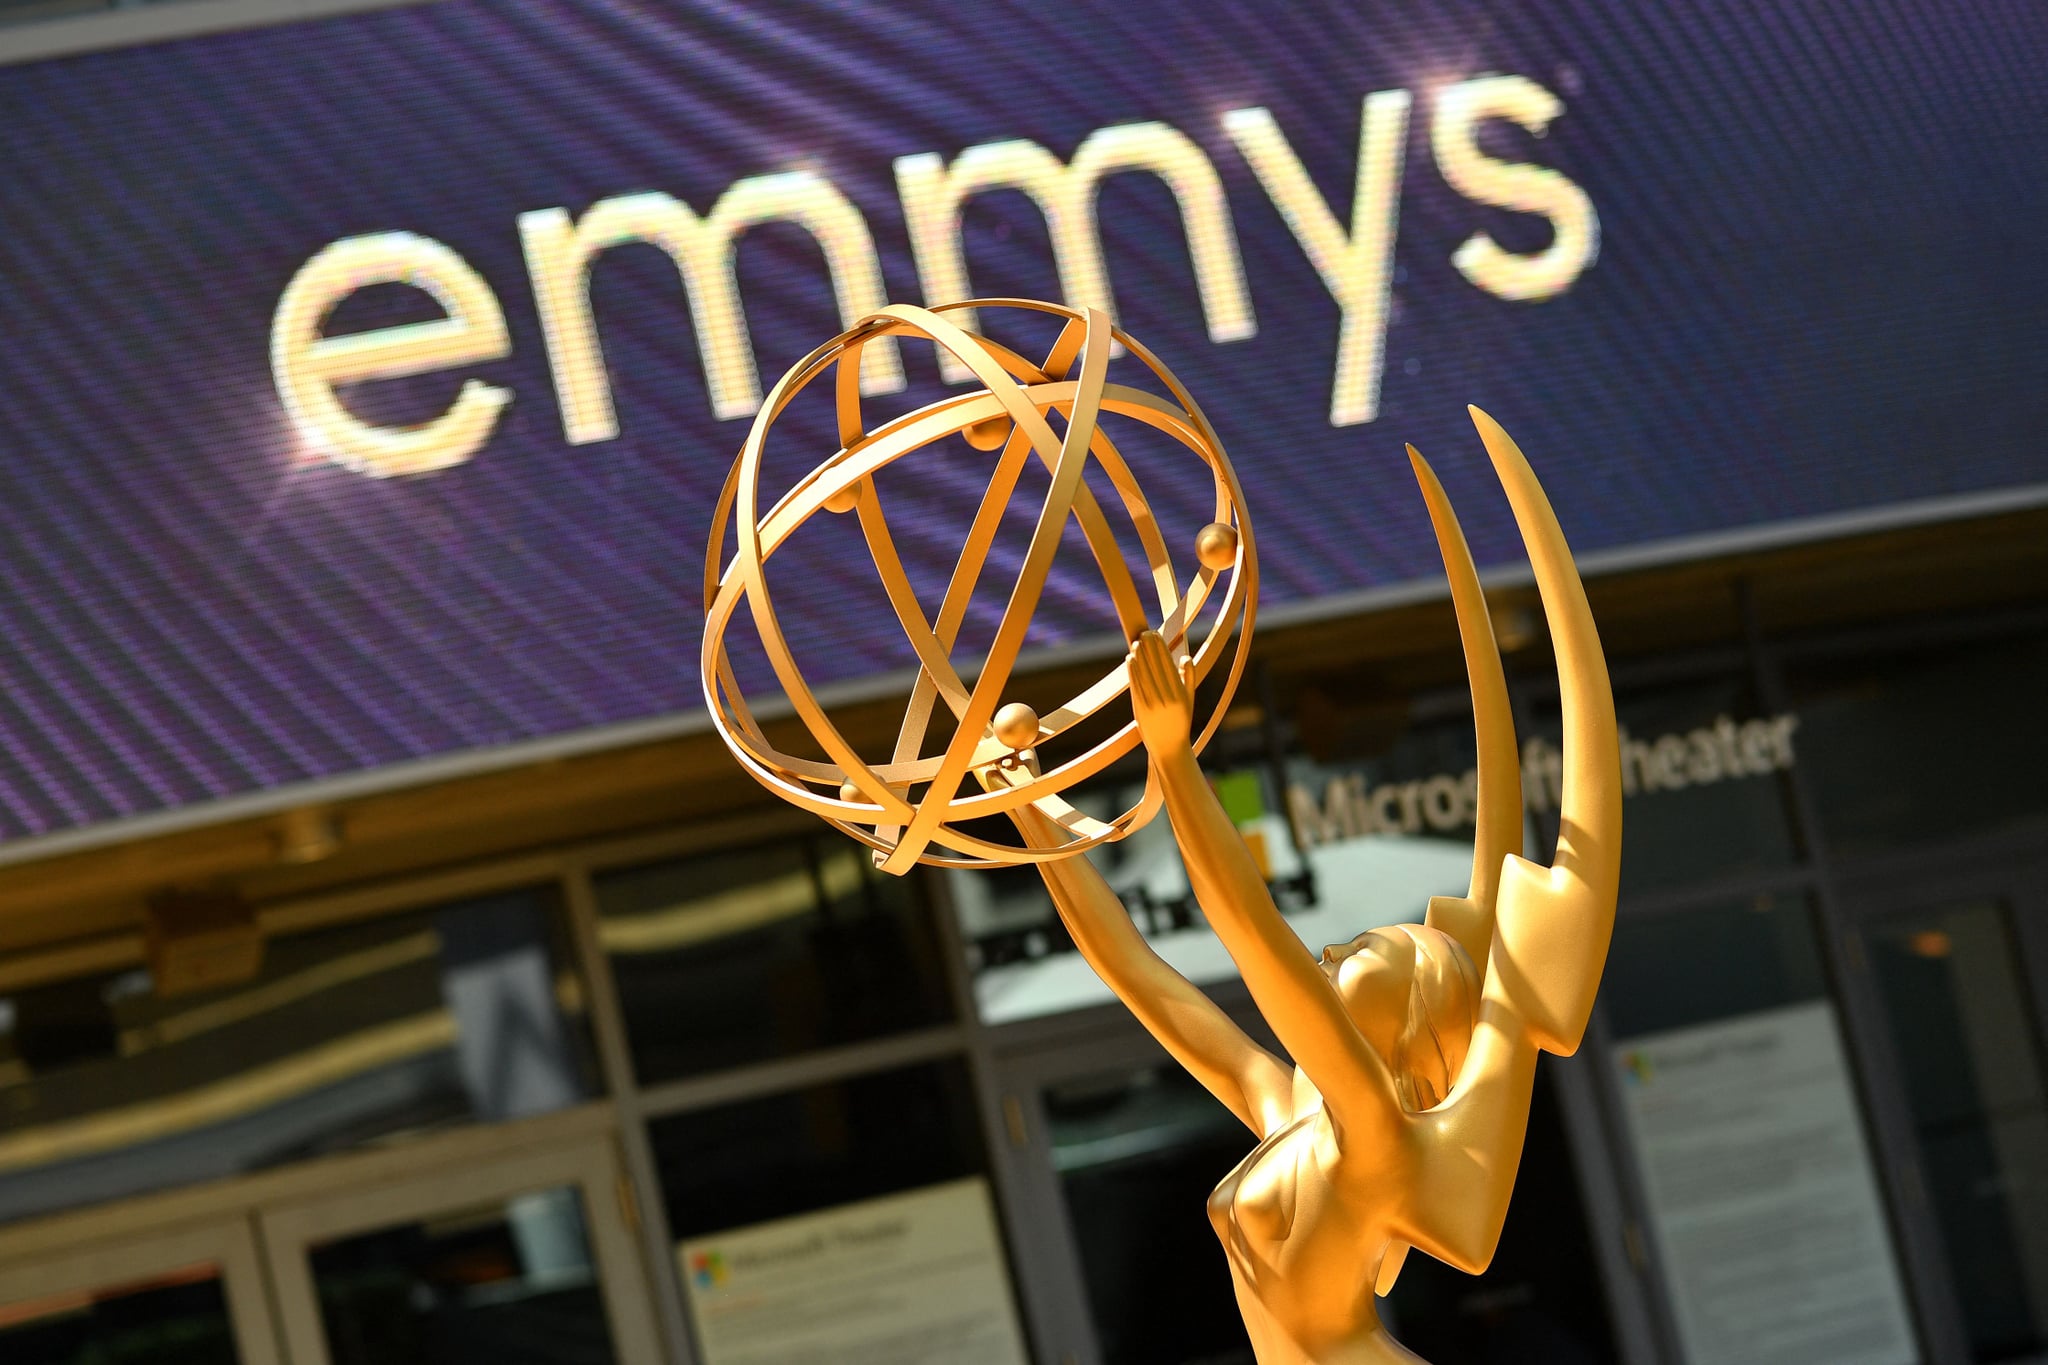 An Emmy statue is seen on the red carpet ahead of the 74th Emmy Awards at the Microsoft Theatre in Los Angeles, California, on September 12, 2022. (Photo by Chris DELMAS / AFP) (Photo by CHRIS DELMAS/AFP via Getty Images)